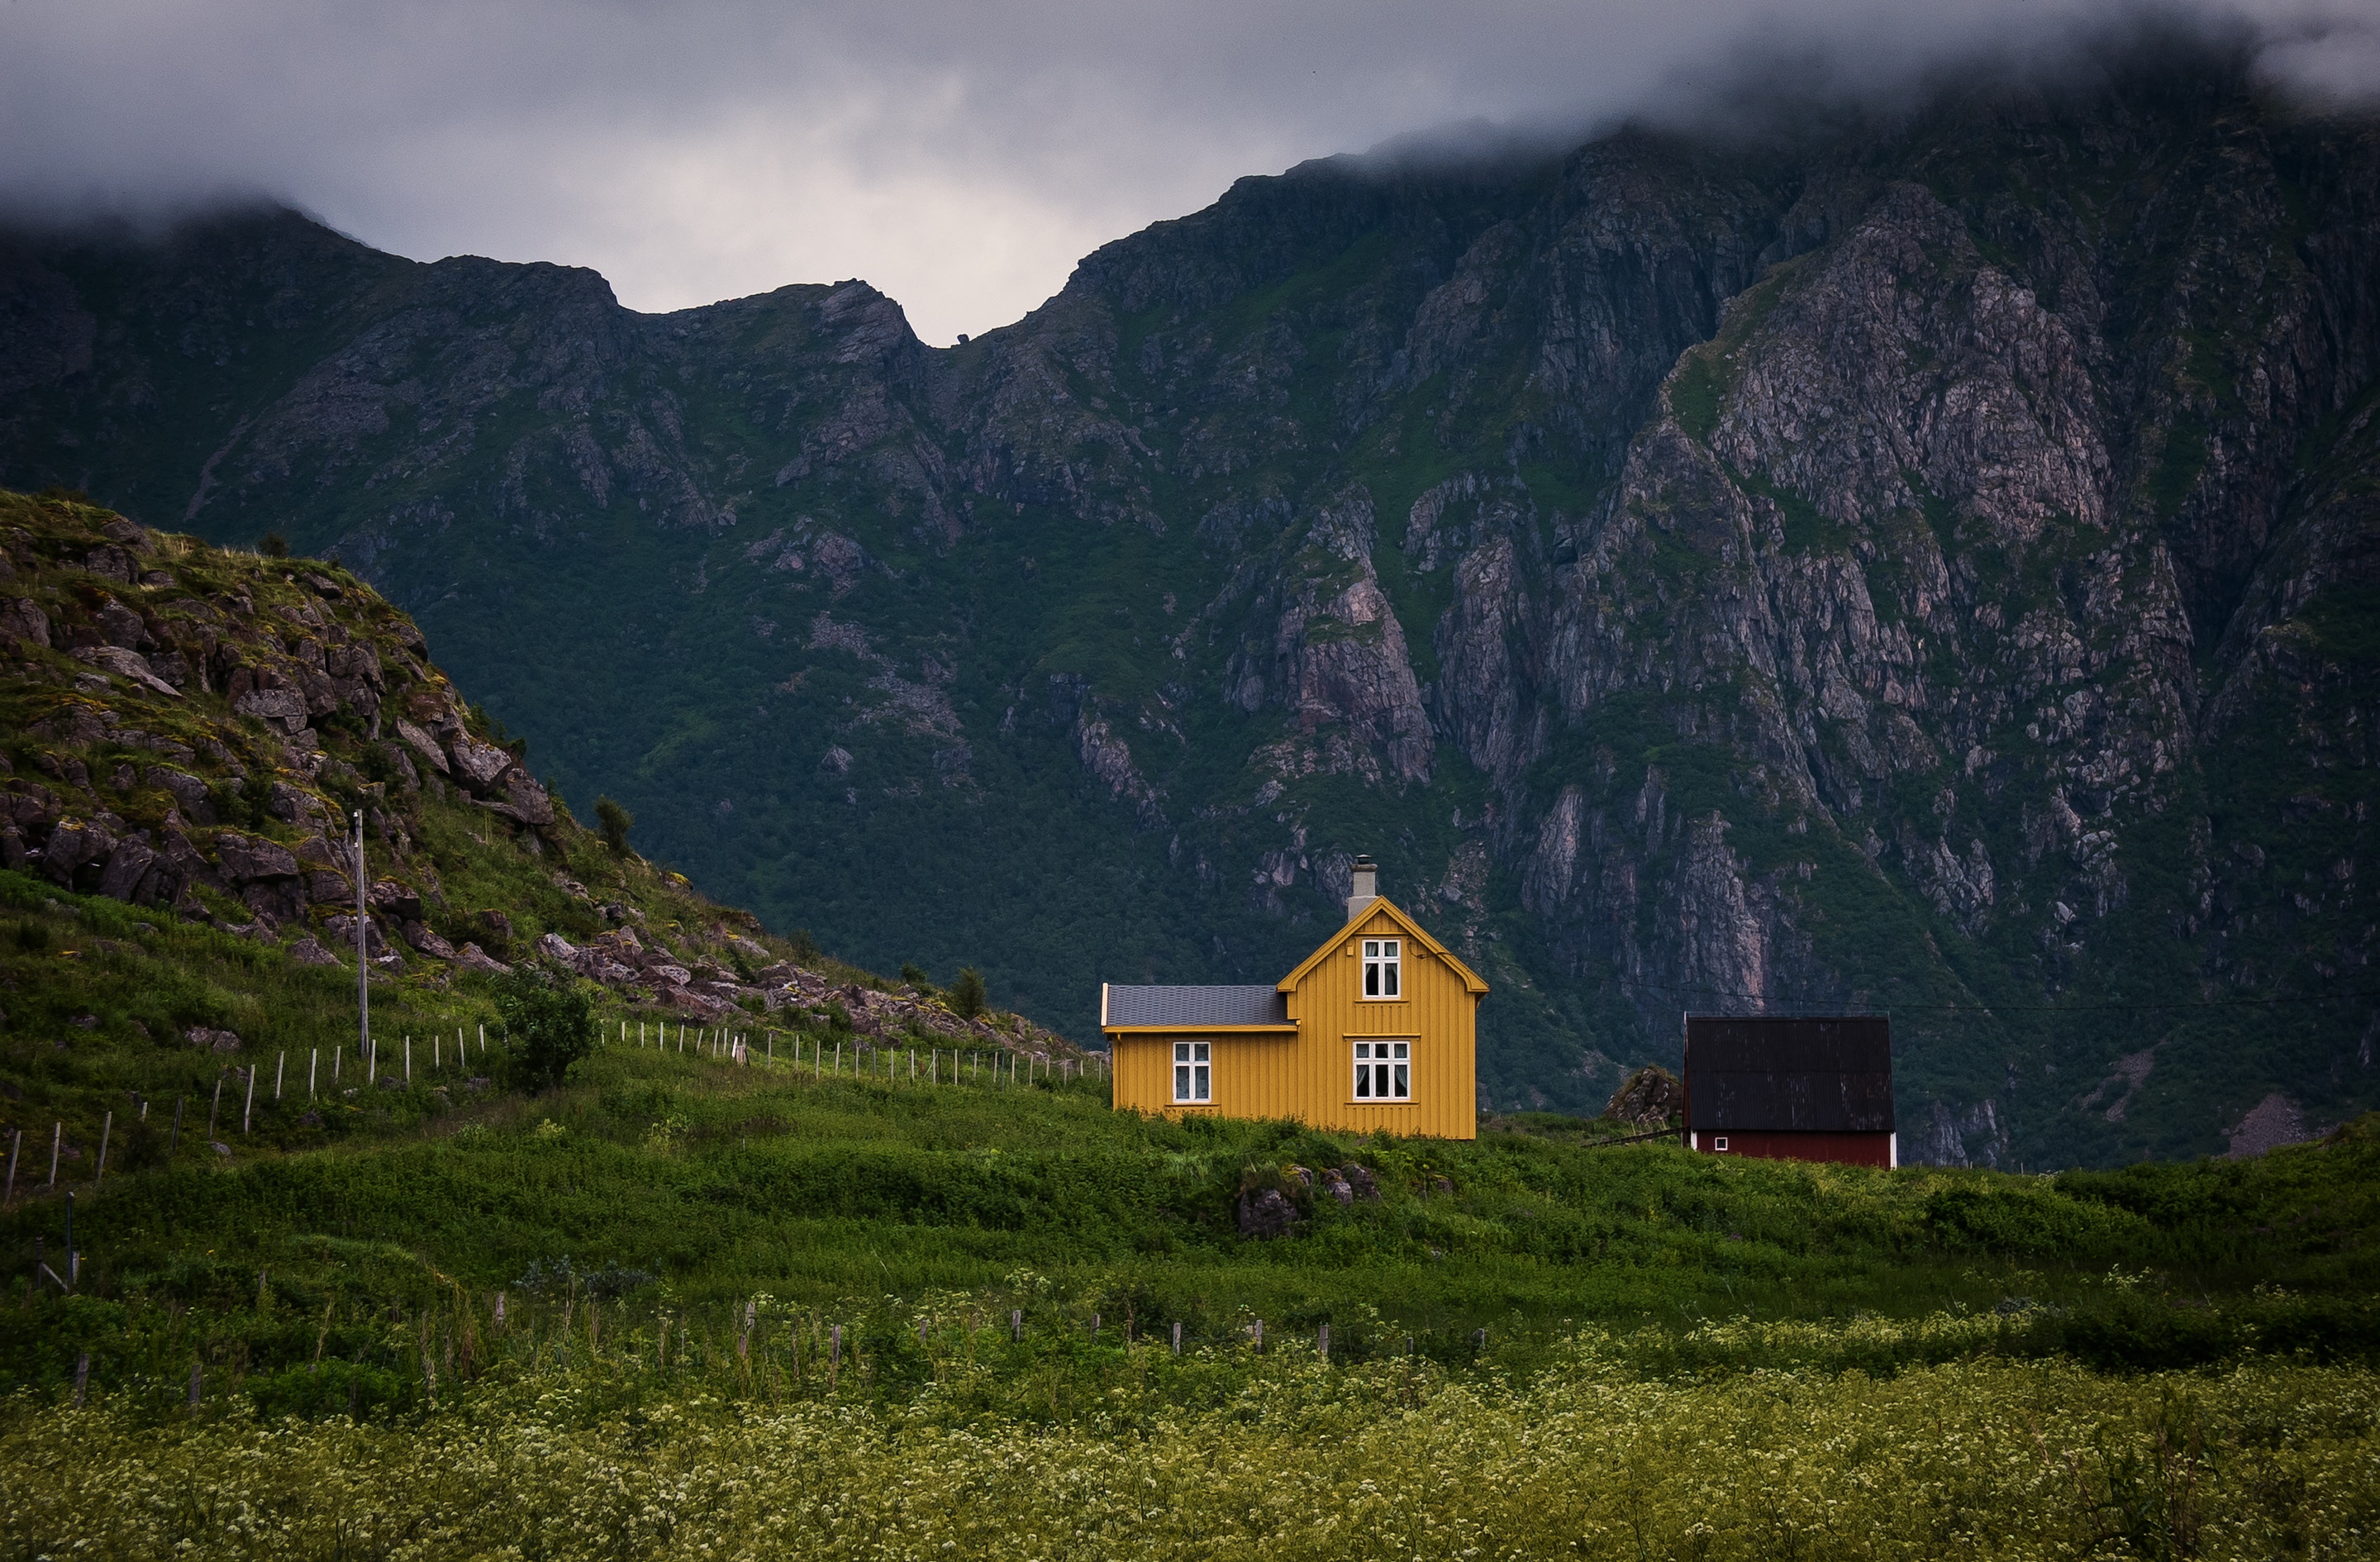 seclusion, small house, privacy, nature, grass, mountains, clouds, lodge 2160p